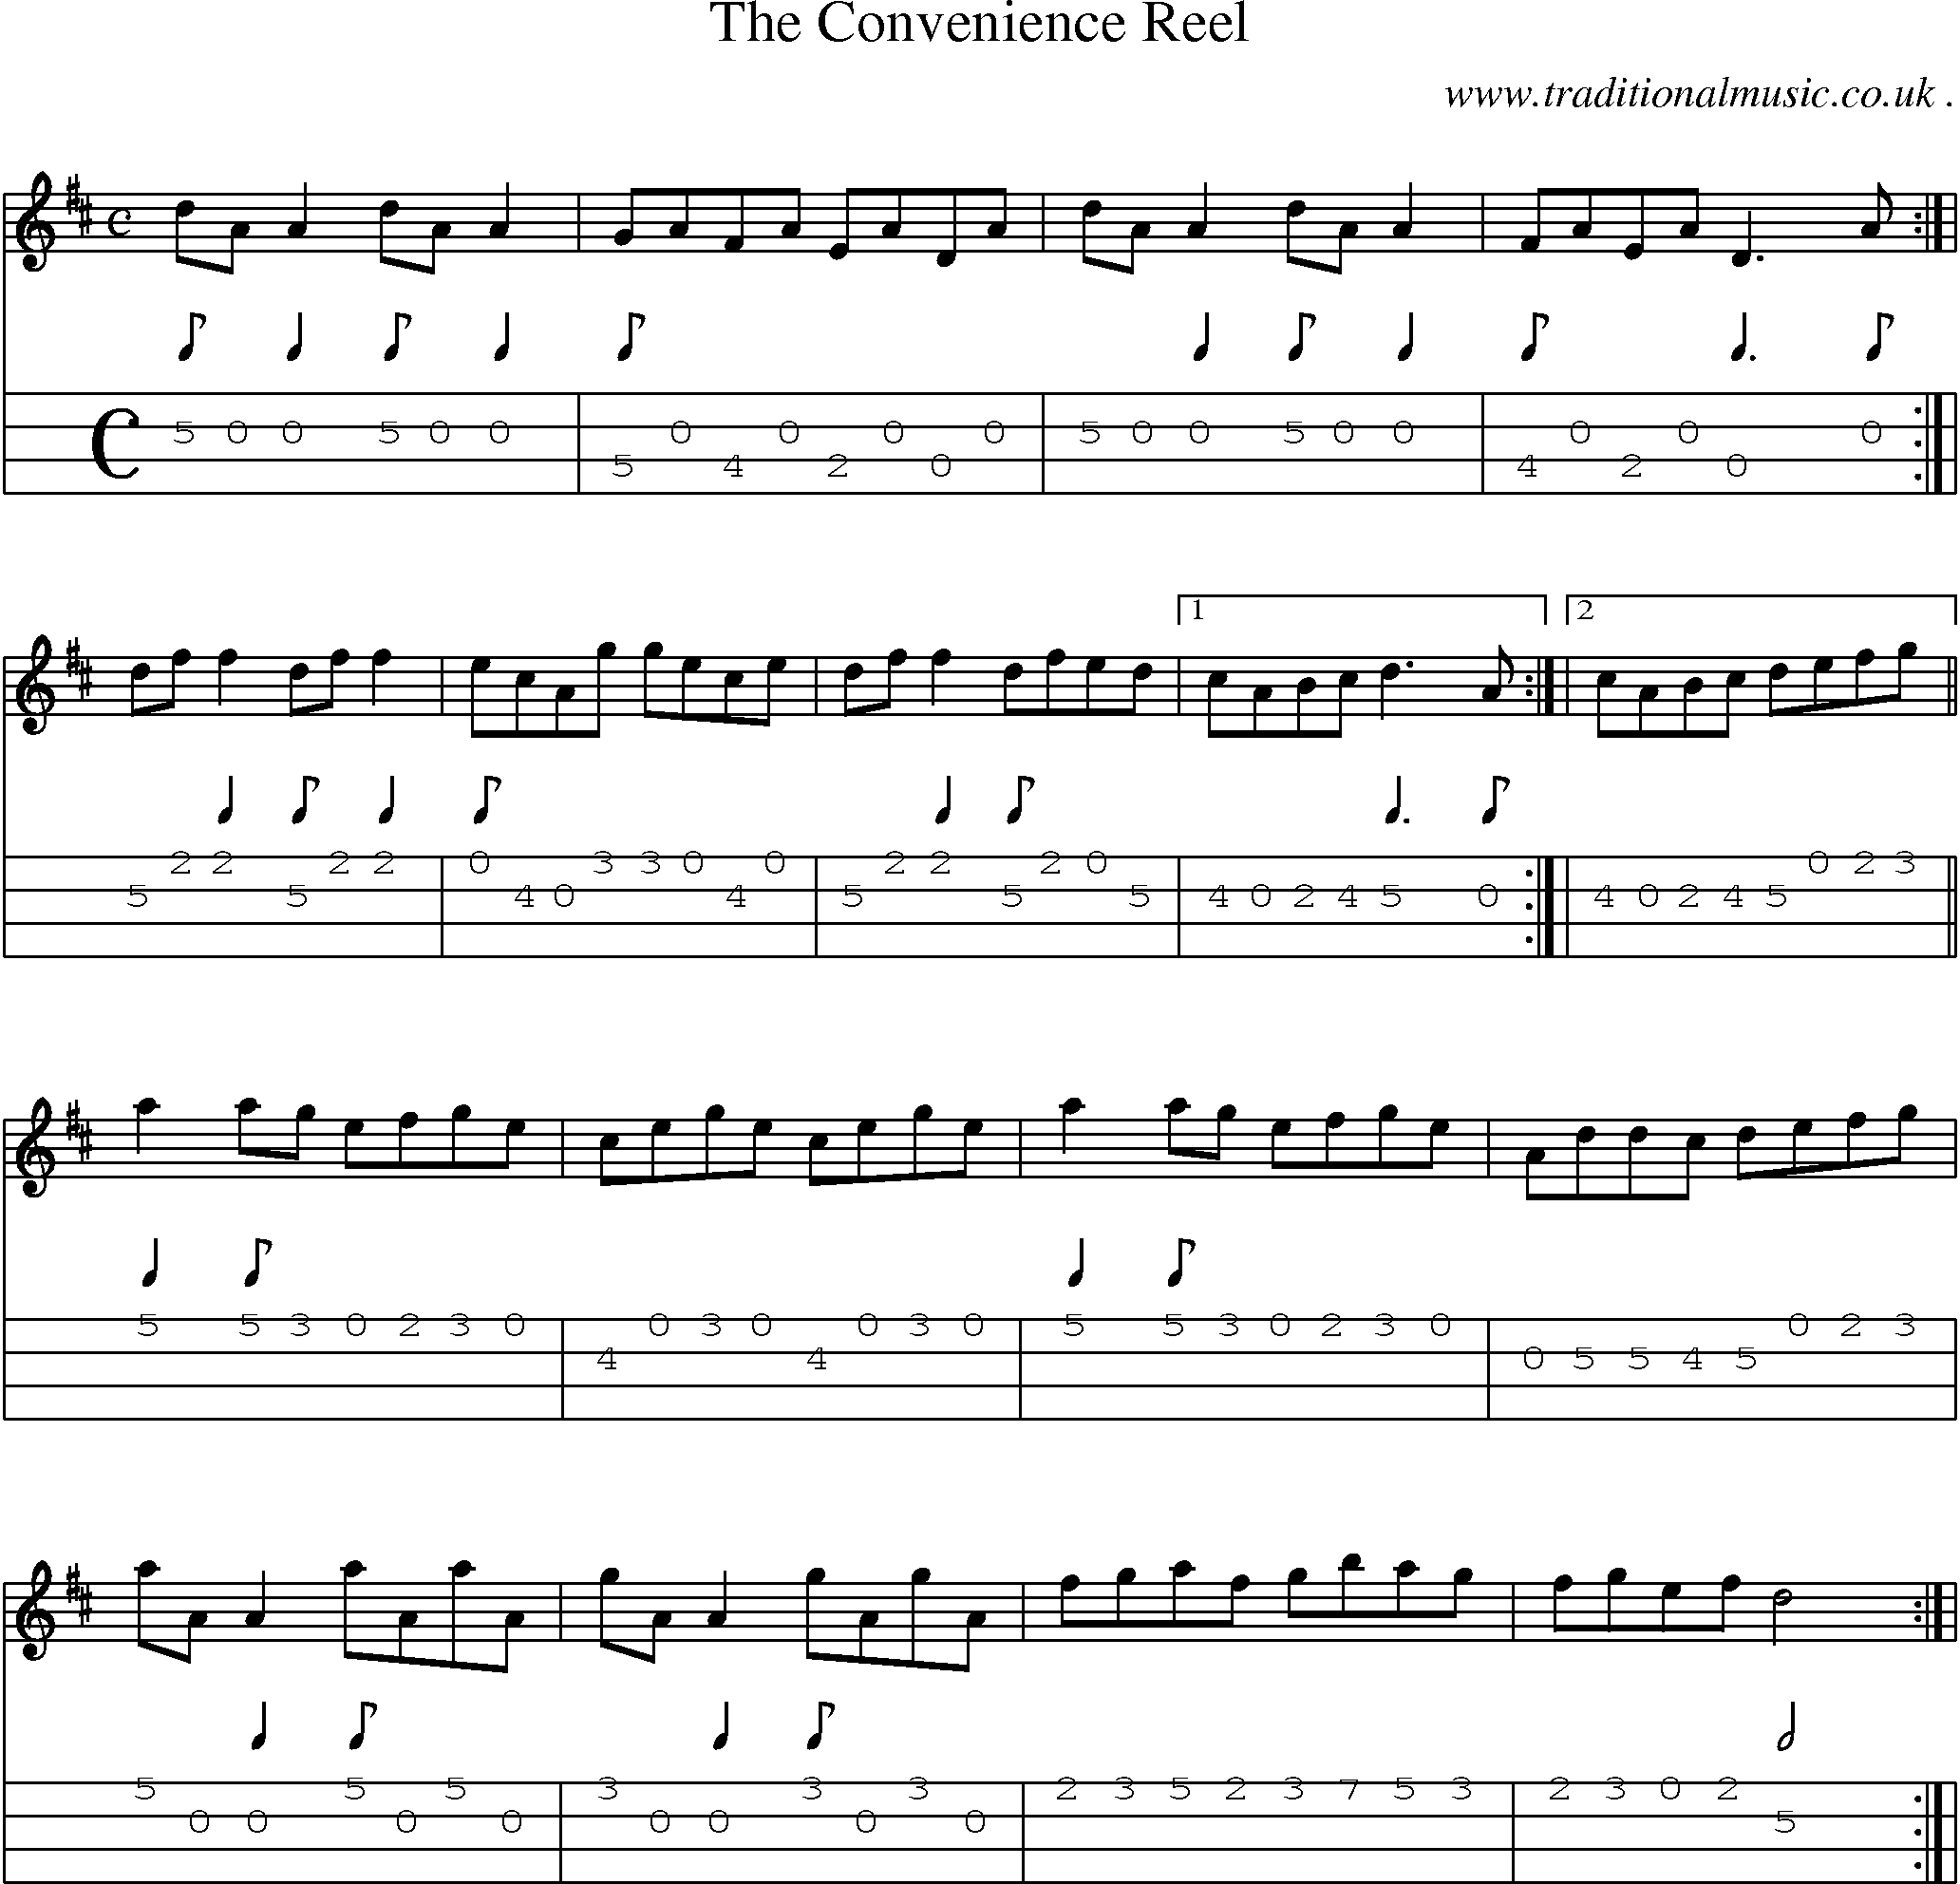 Sheet-Music and Mandolin Tabs for The Convenience Reel